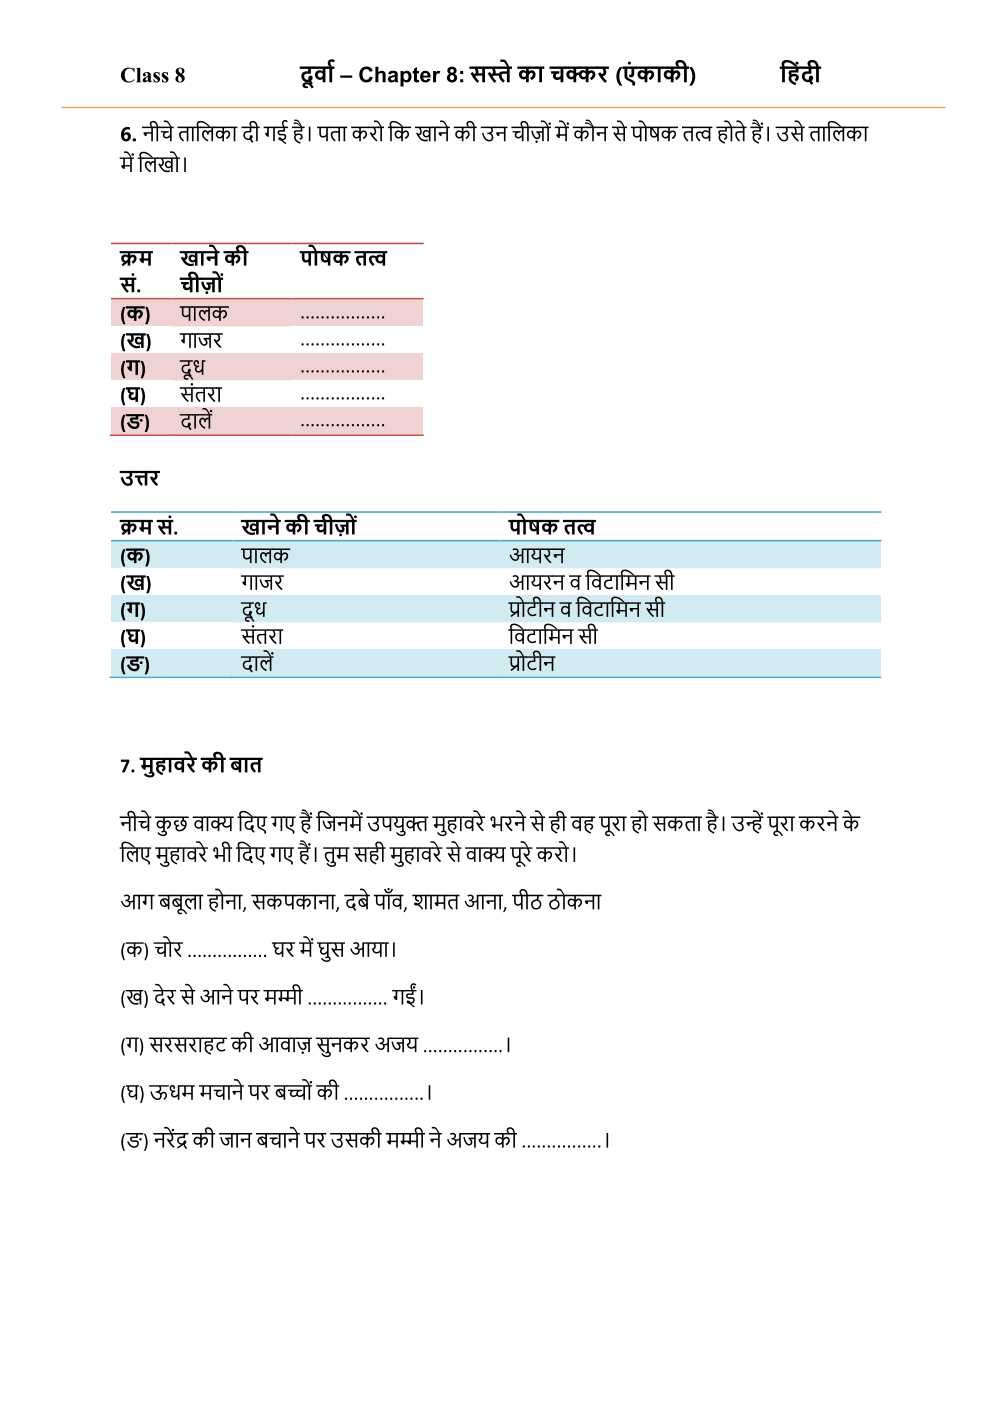 NCERT Solutions For Class 8 Hindi Durva Chapter 8